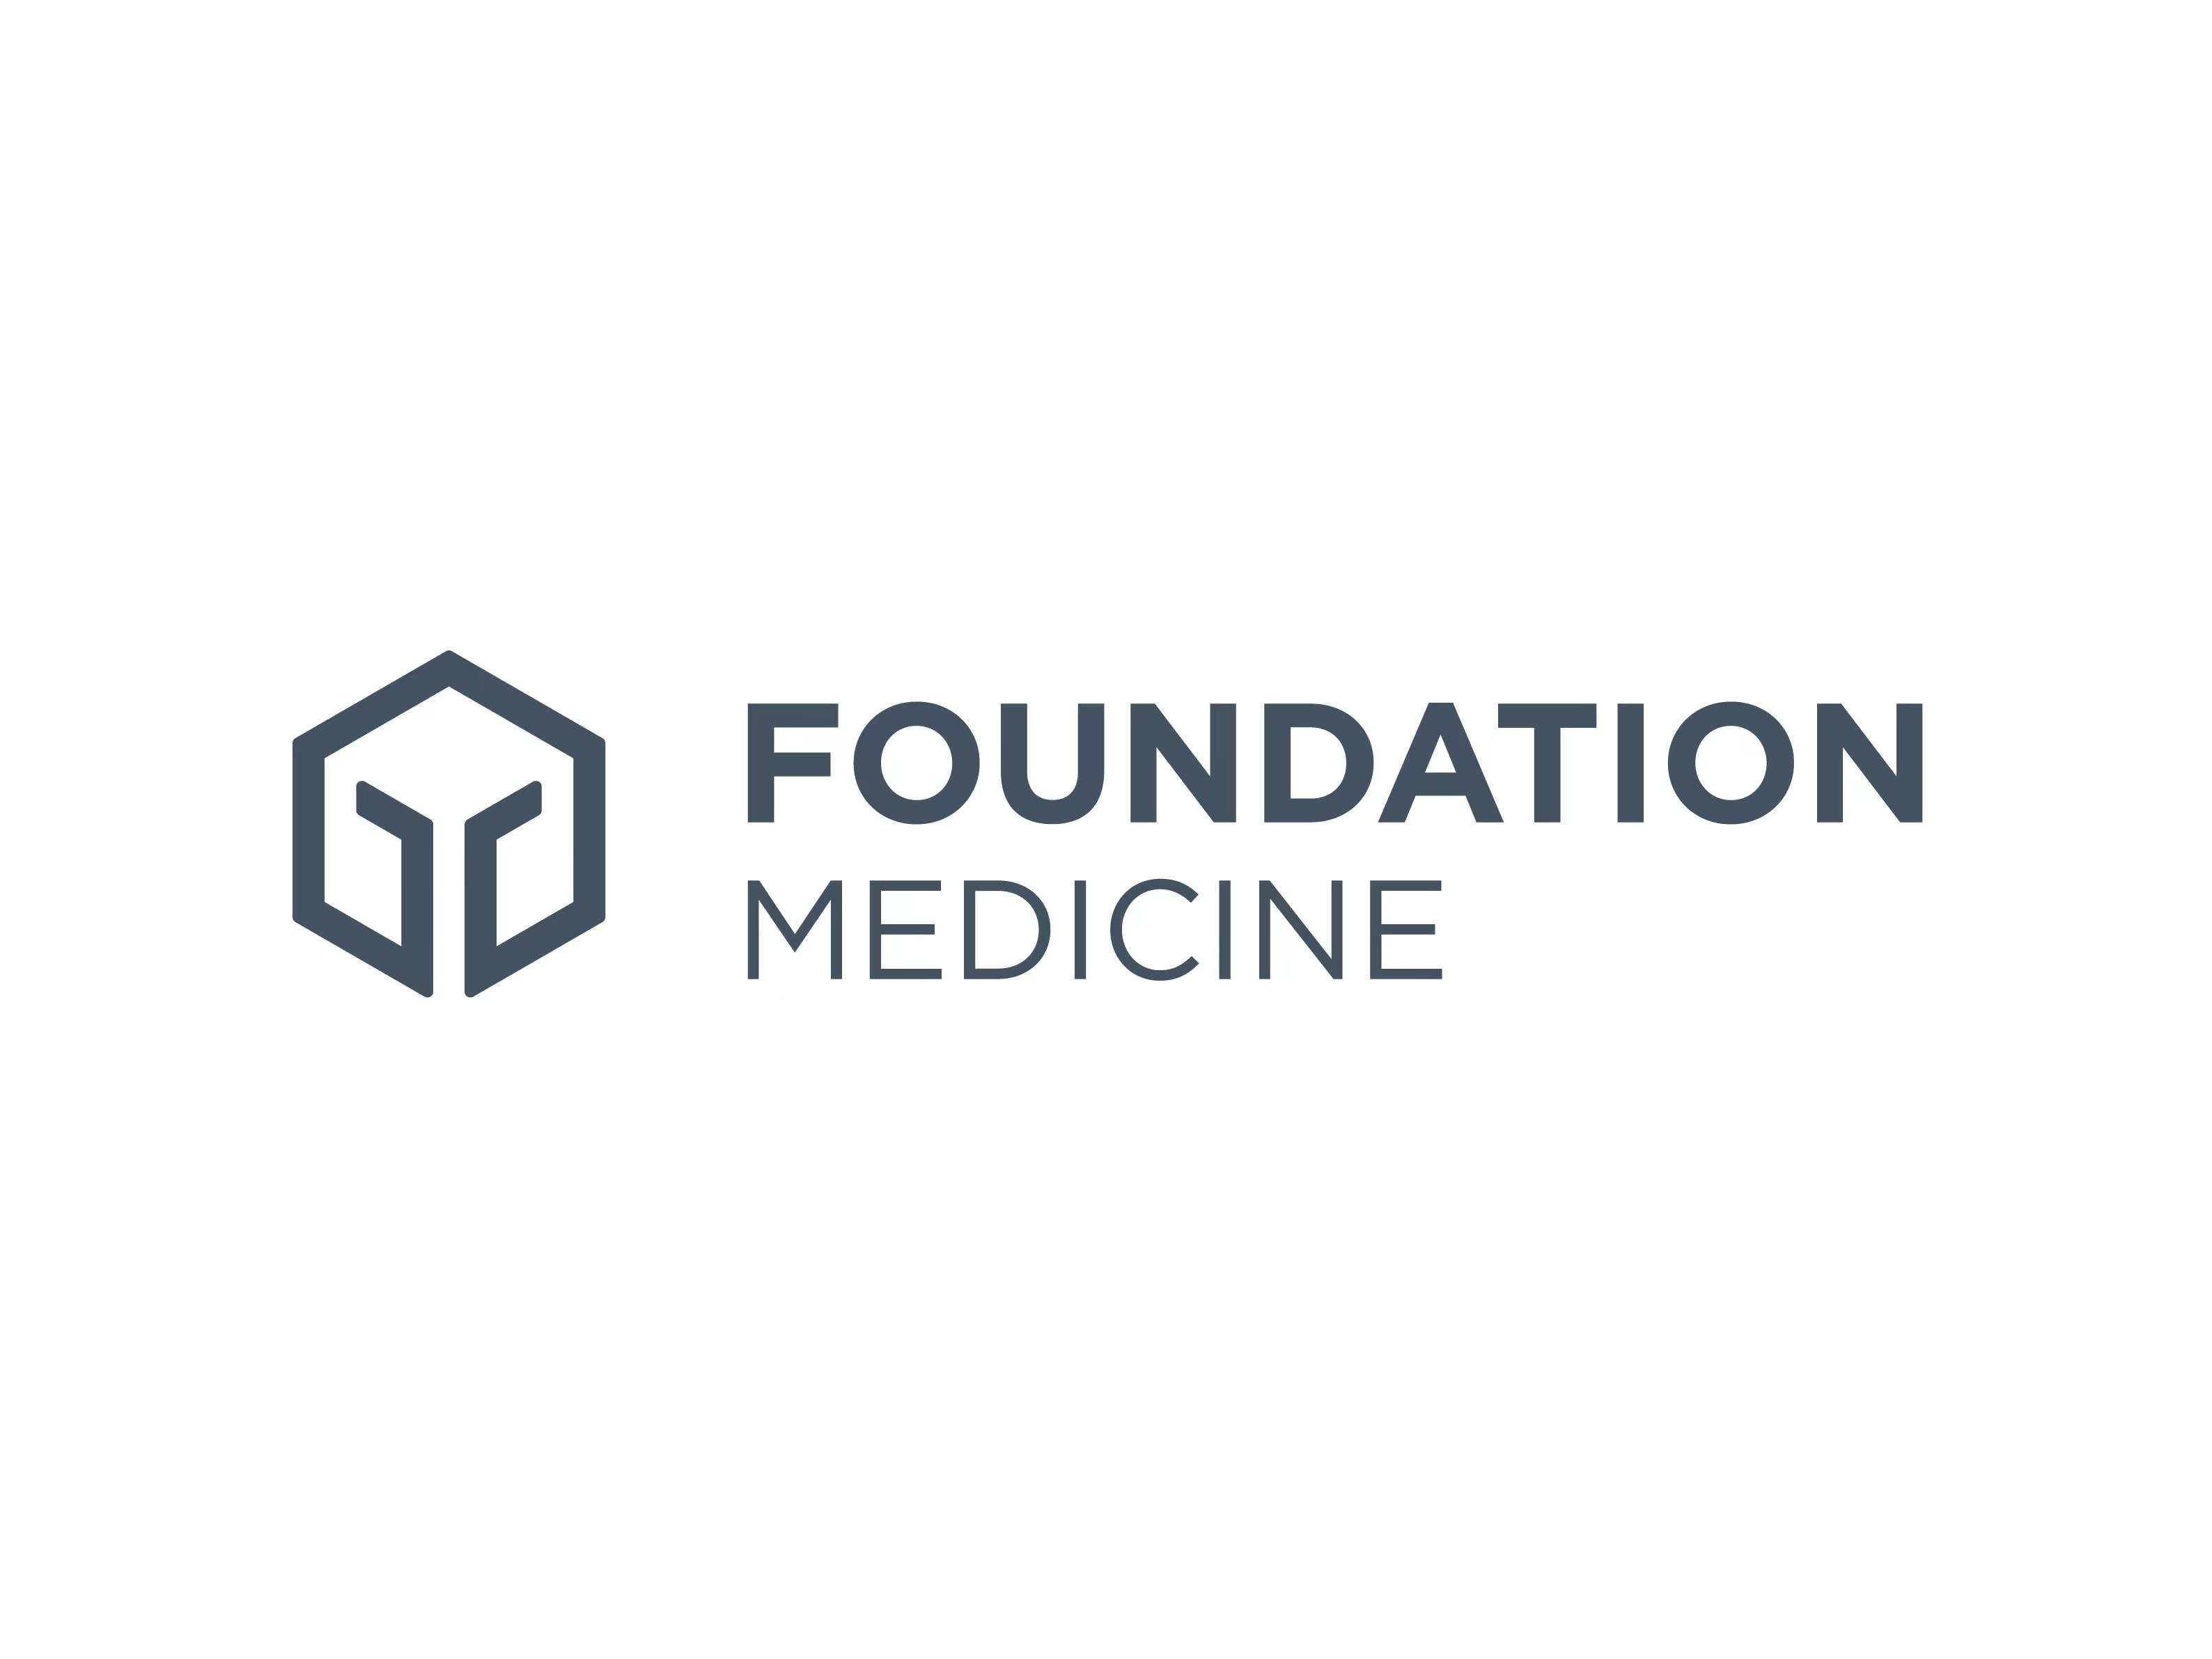 U.S. Food and Drug Administration (FDA) Approves FoundationOne®CDx as a Companion Diagnostic for Lilly’s Retevmo® (selpercatinib) for Certain Patients with Solid Tumors